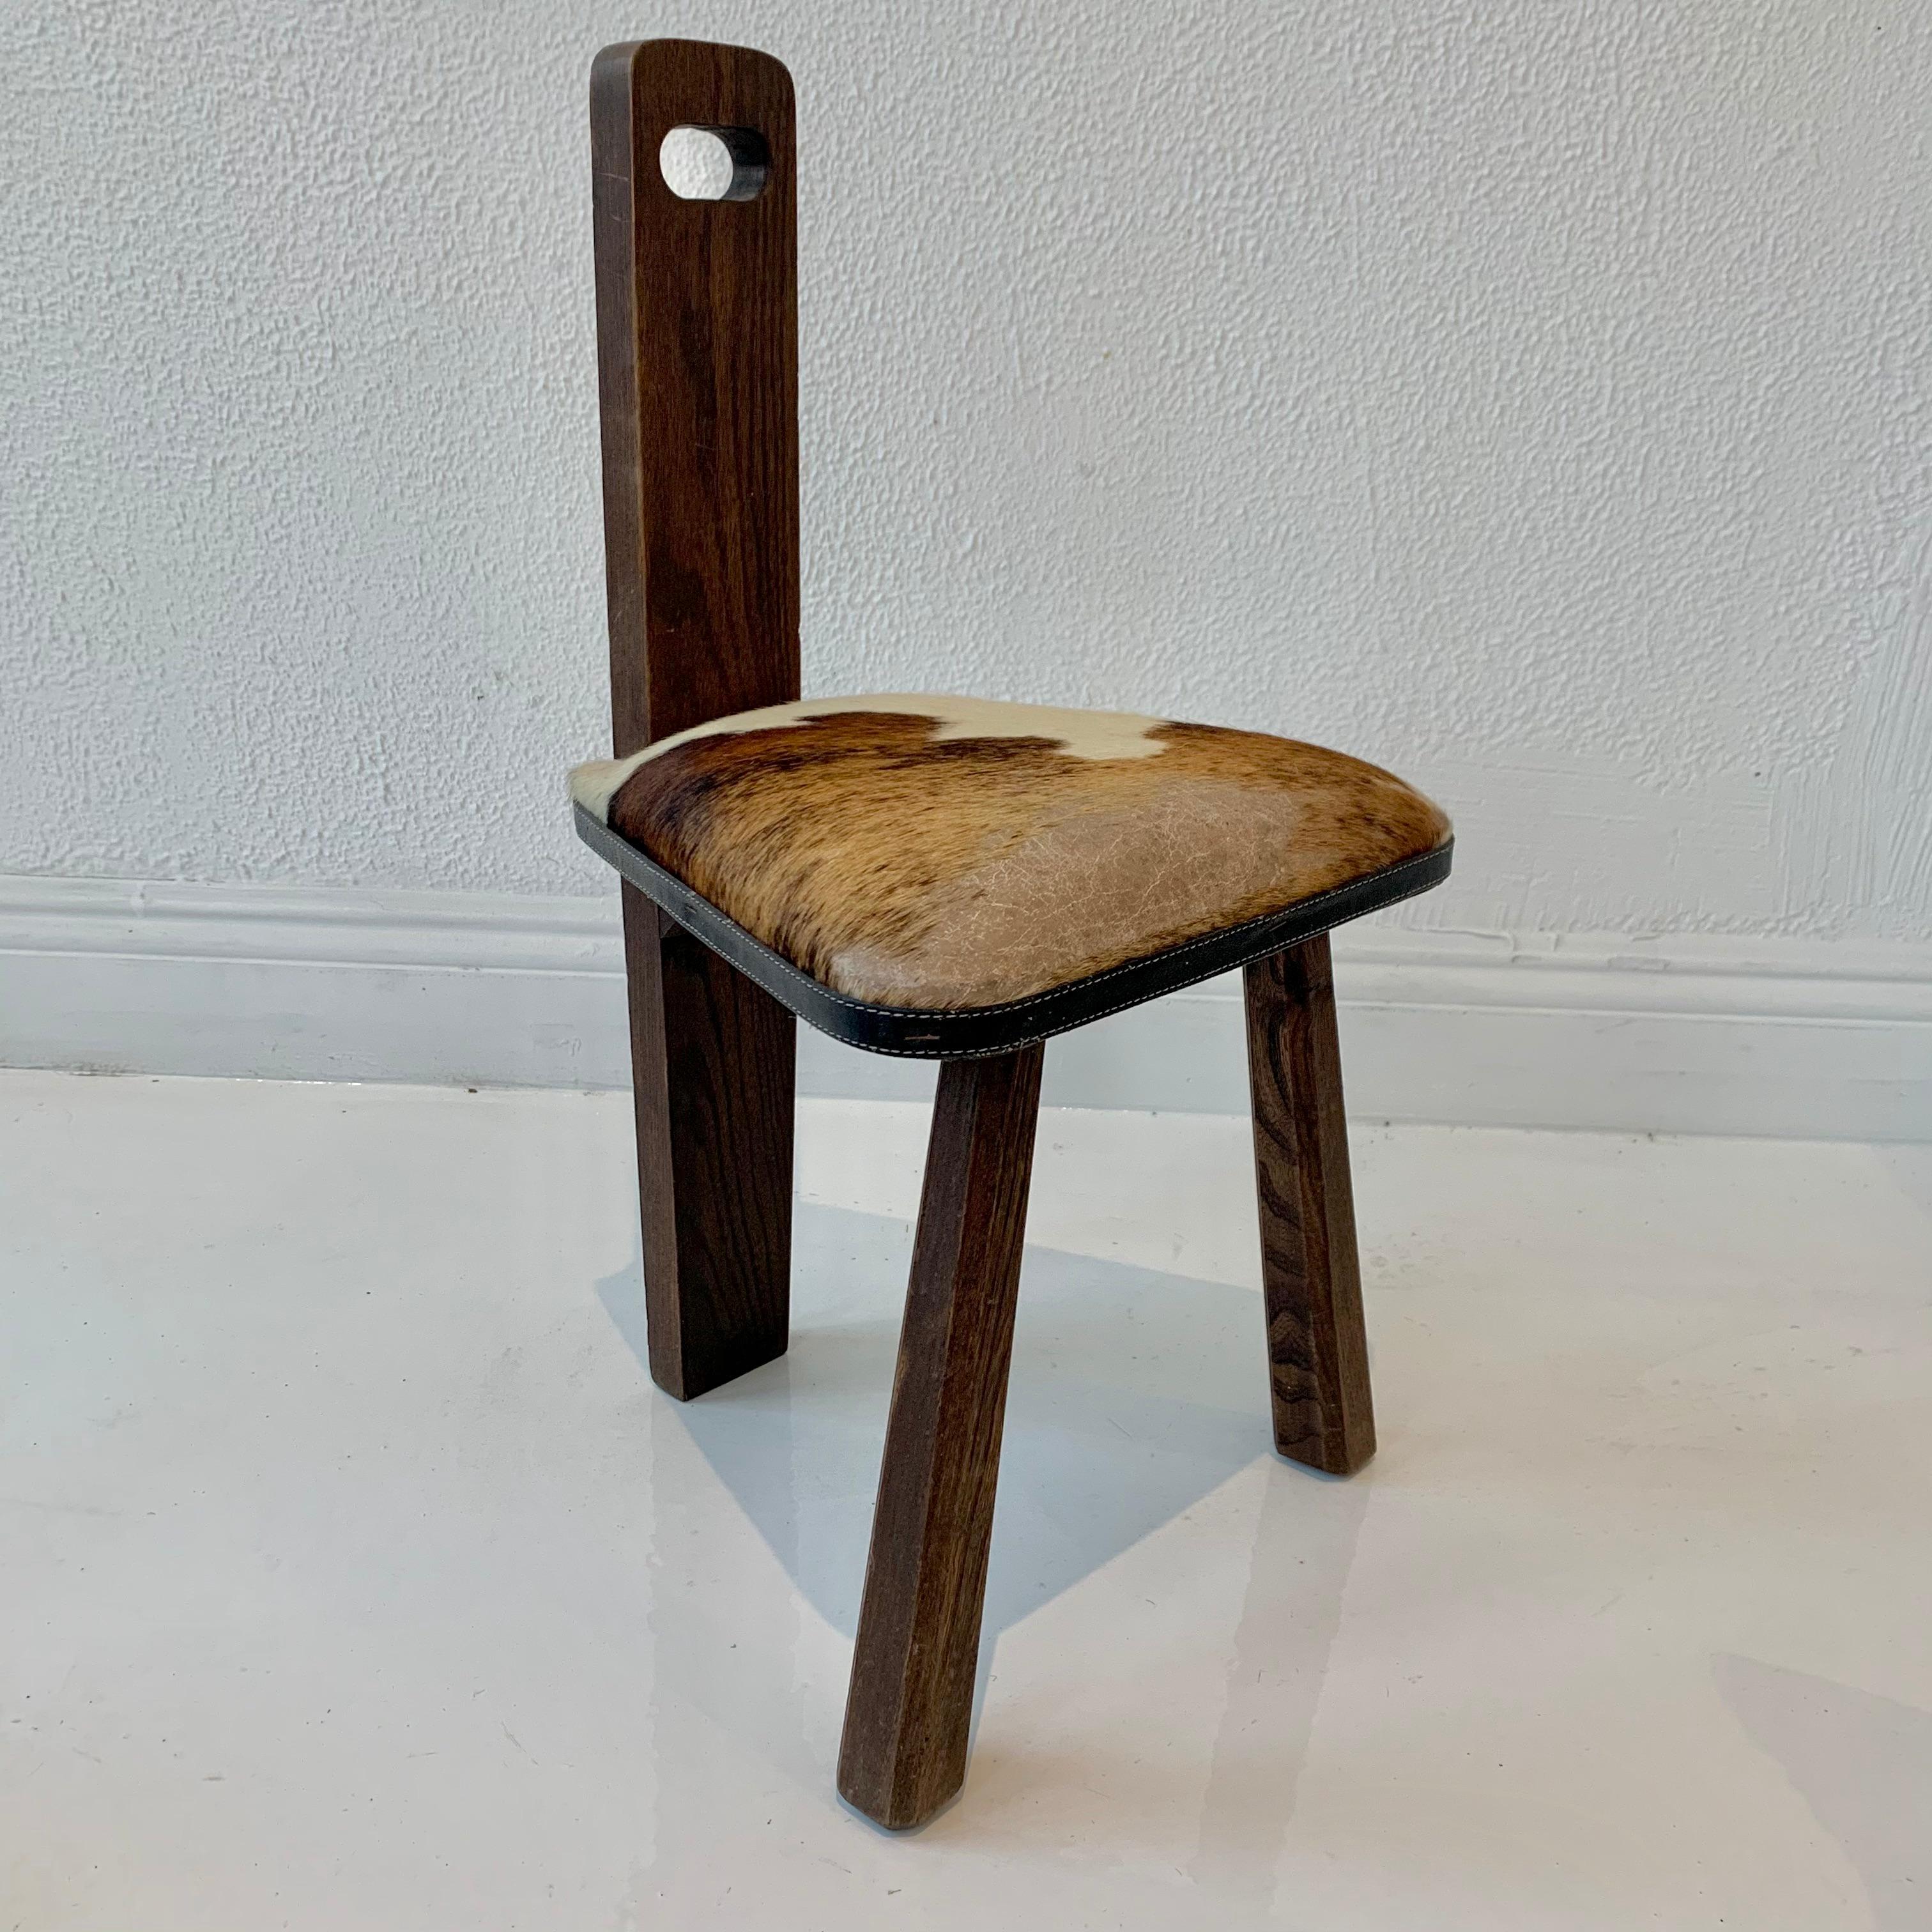 Mid-20th Century Rustic French Stool